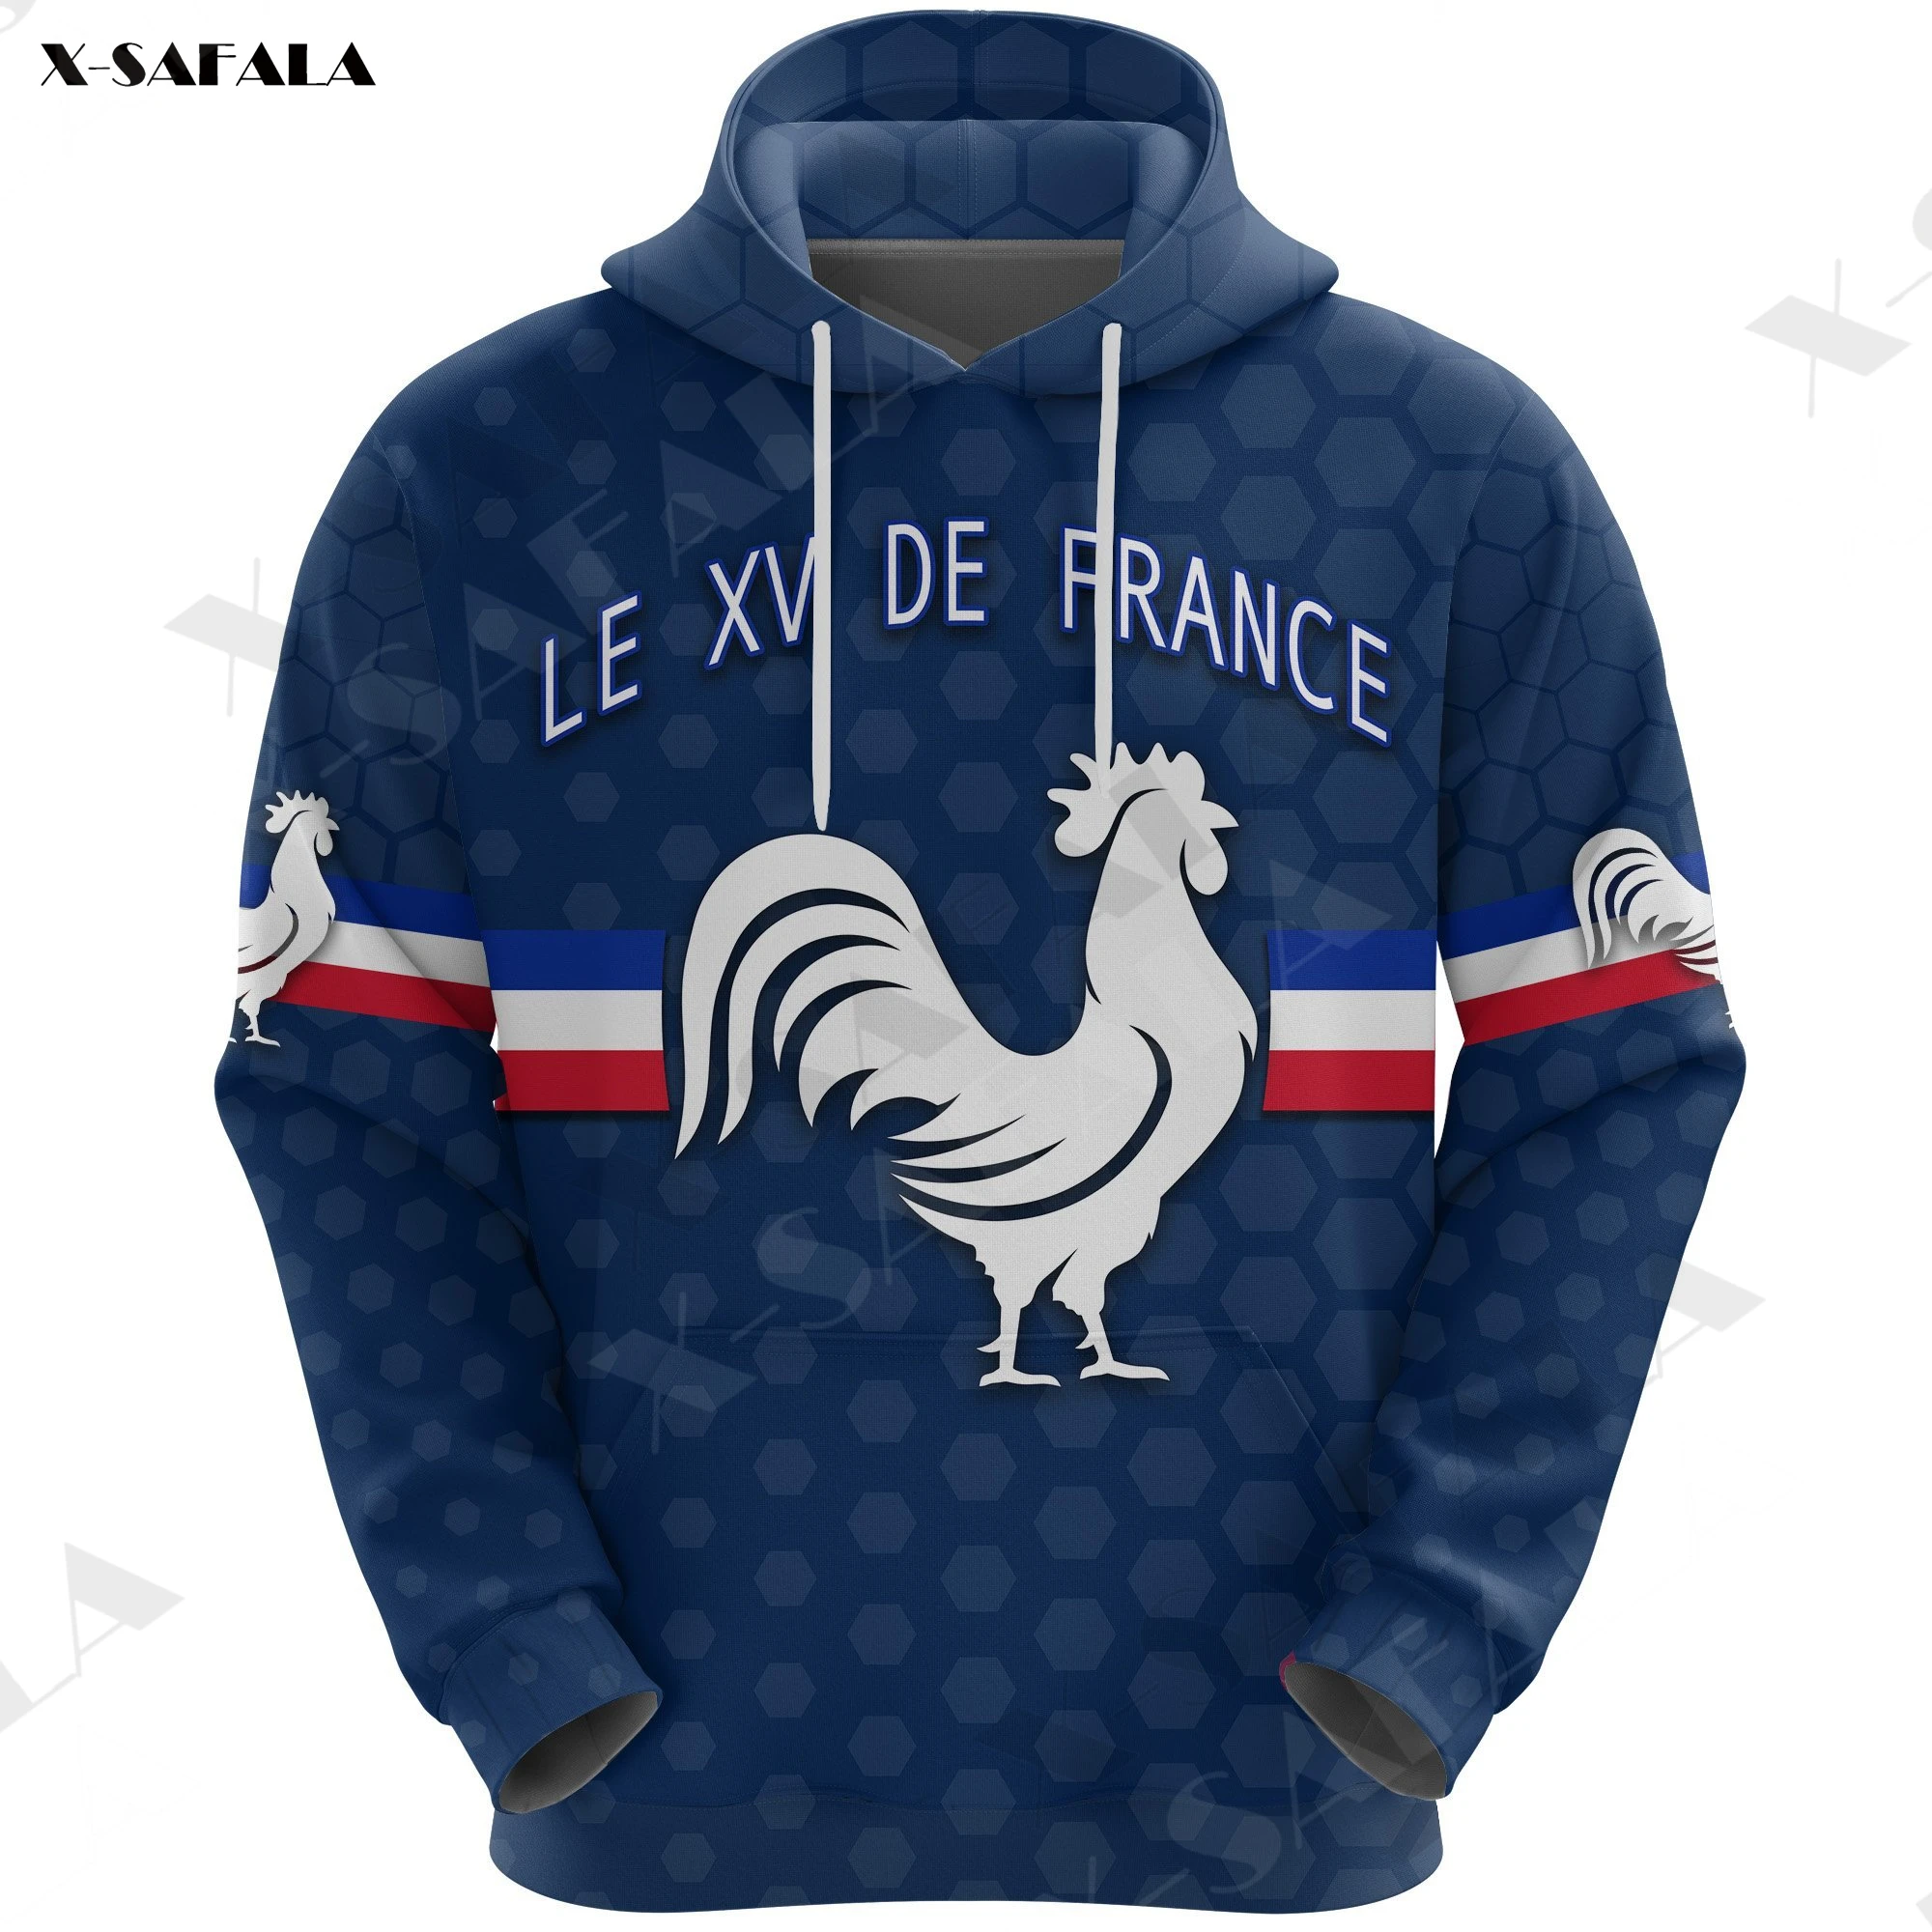 

2023 Hot selling Custom Text Rugby Le XV De France Brush 3D printed zippered hoodie men's pullover hooded sportswear jacket